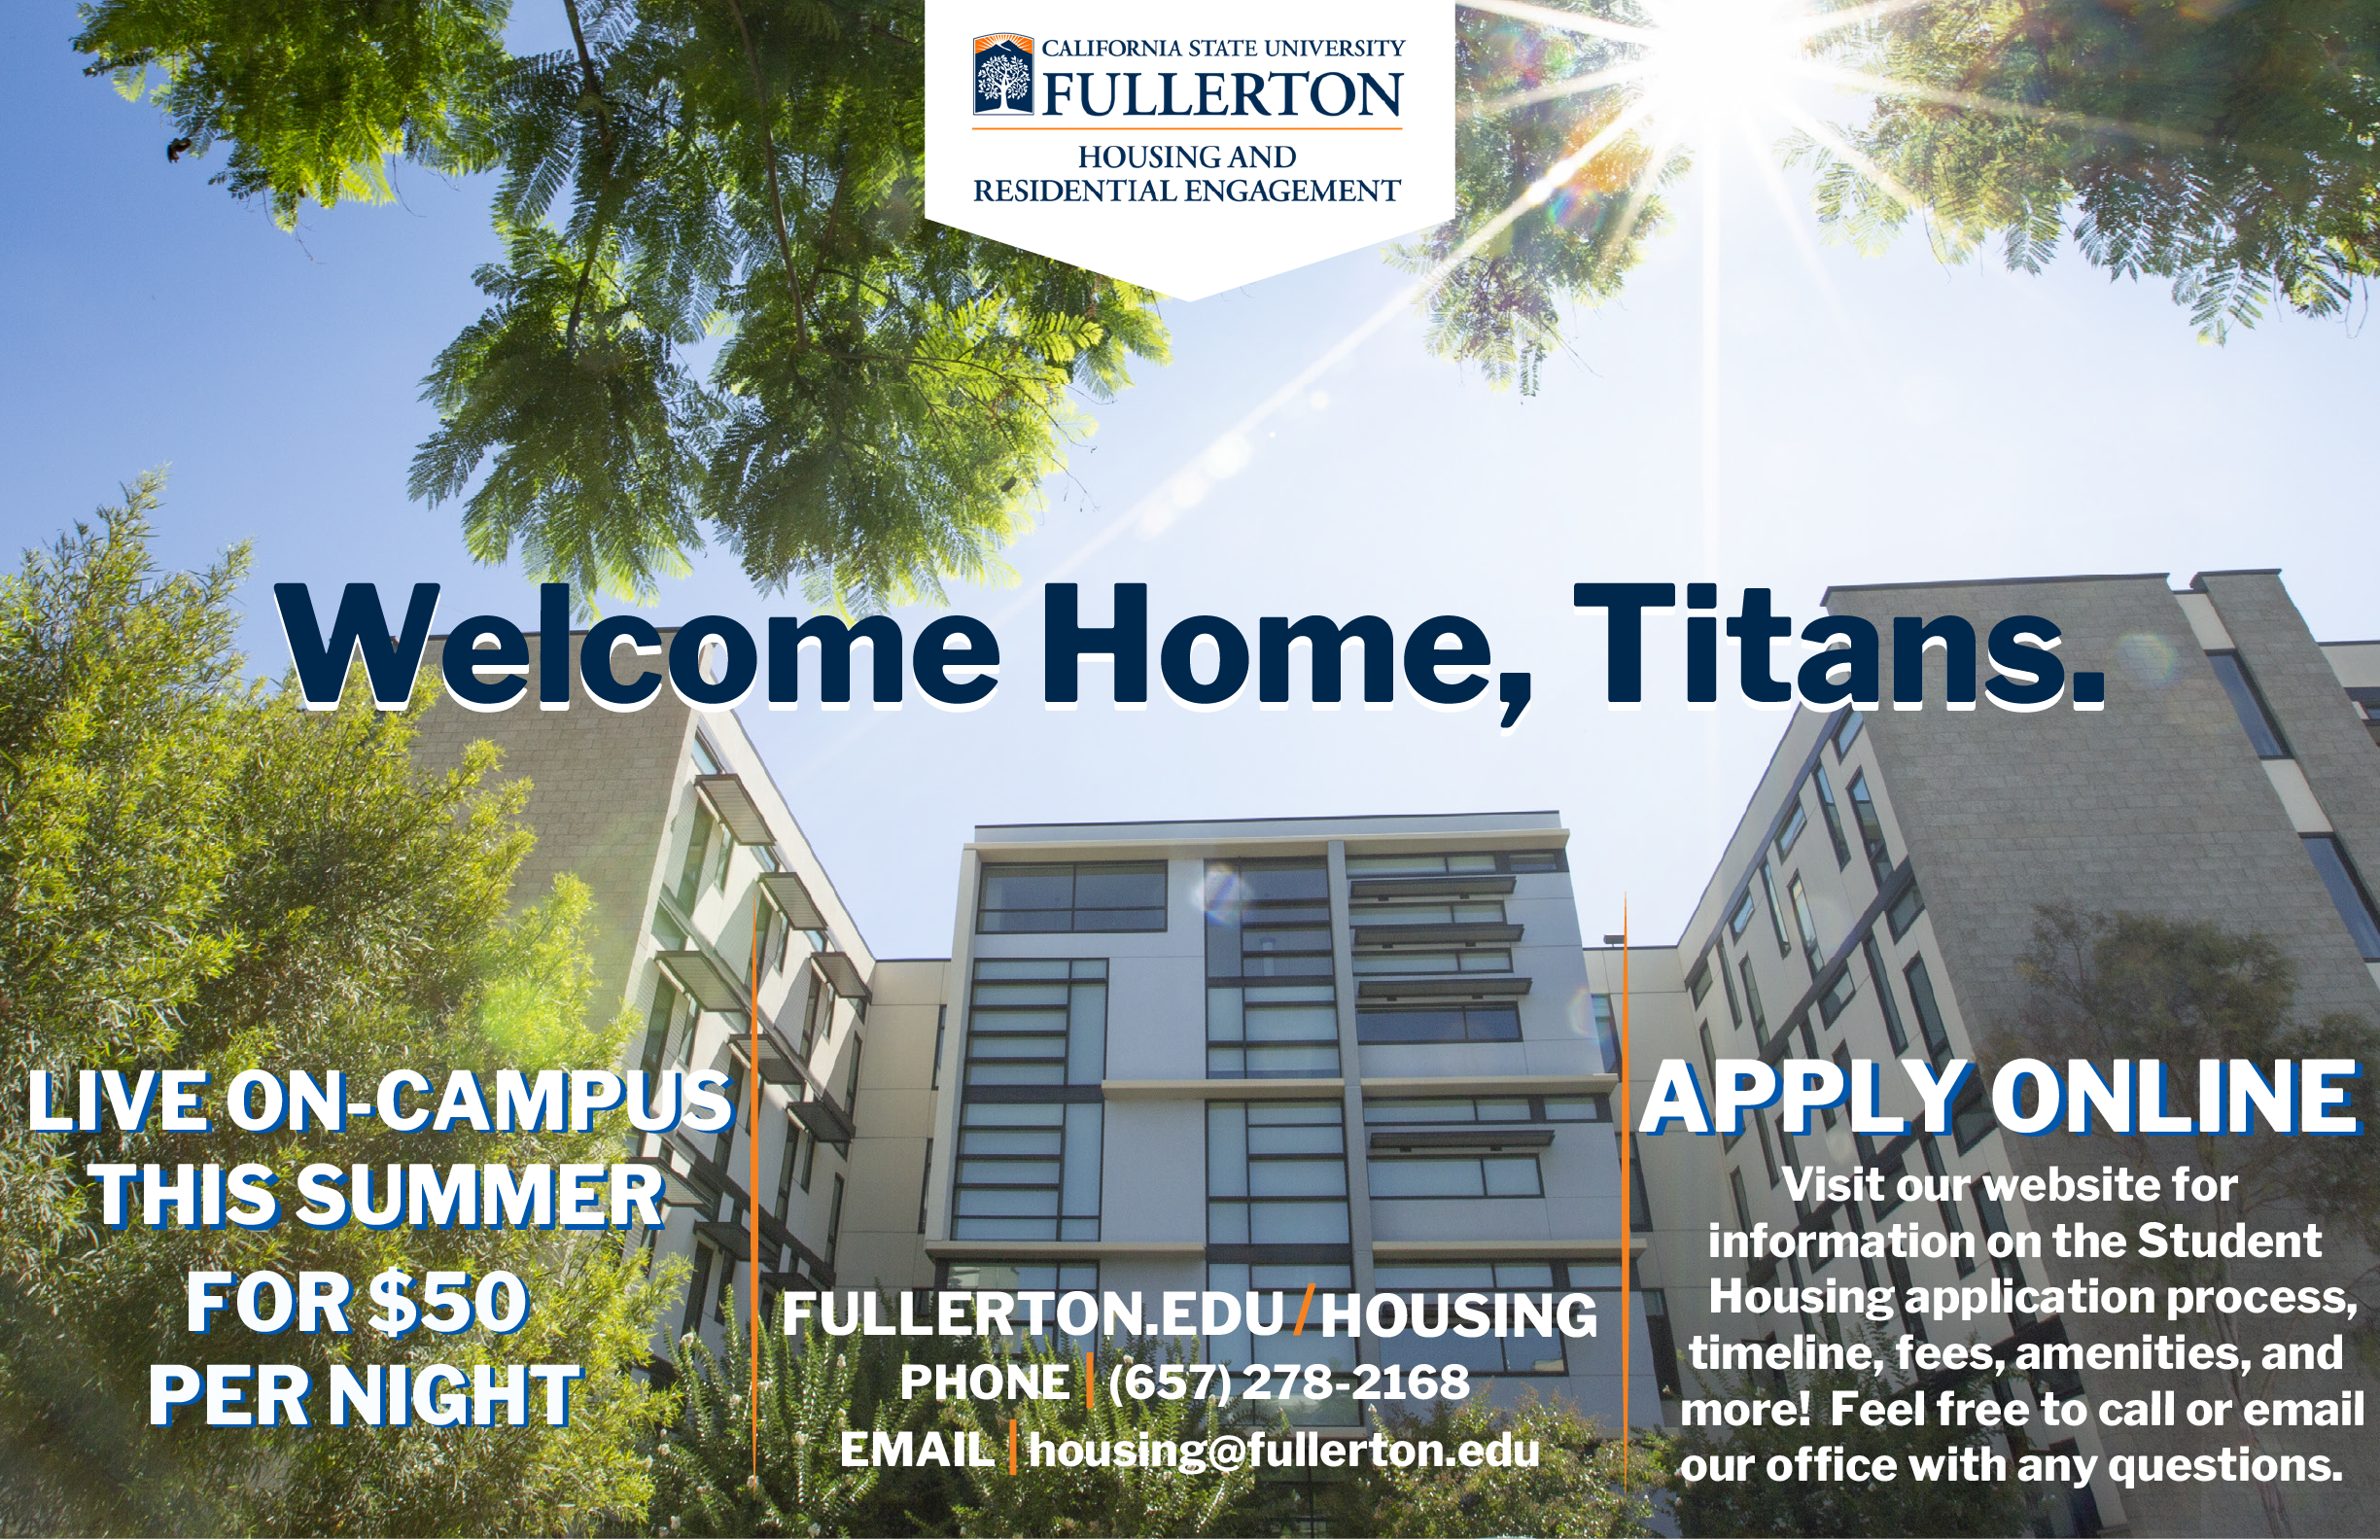 Live on-campus this summer for $50 per night